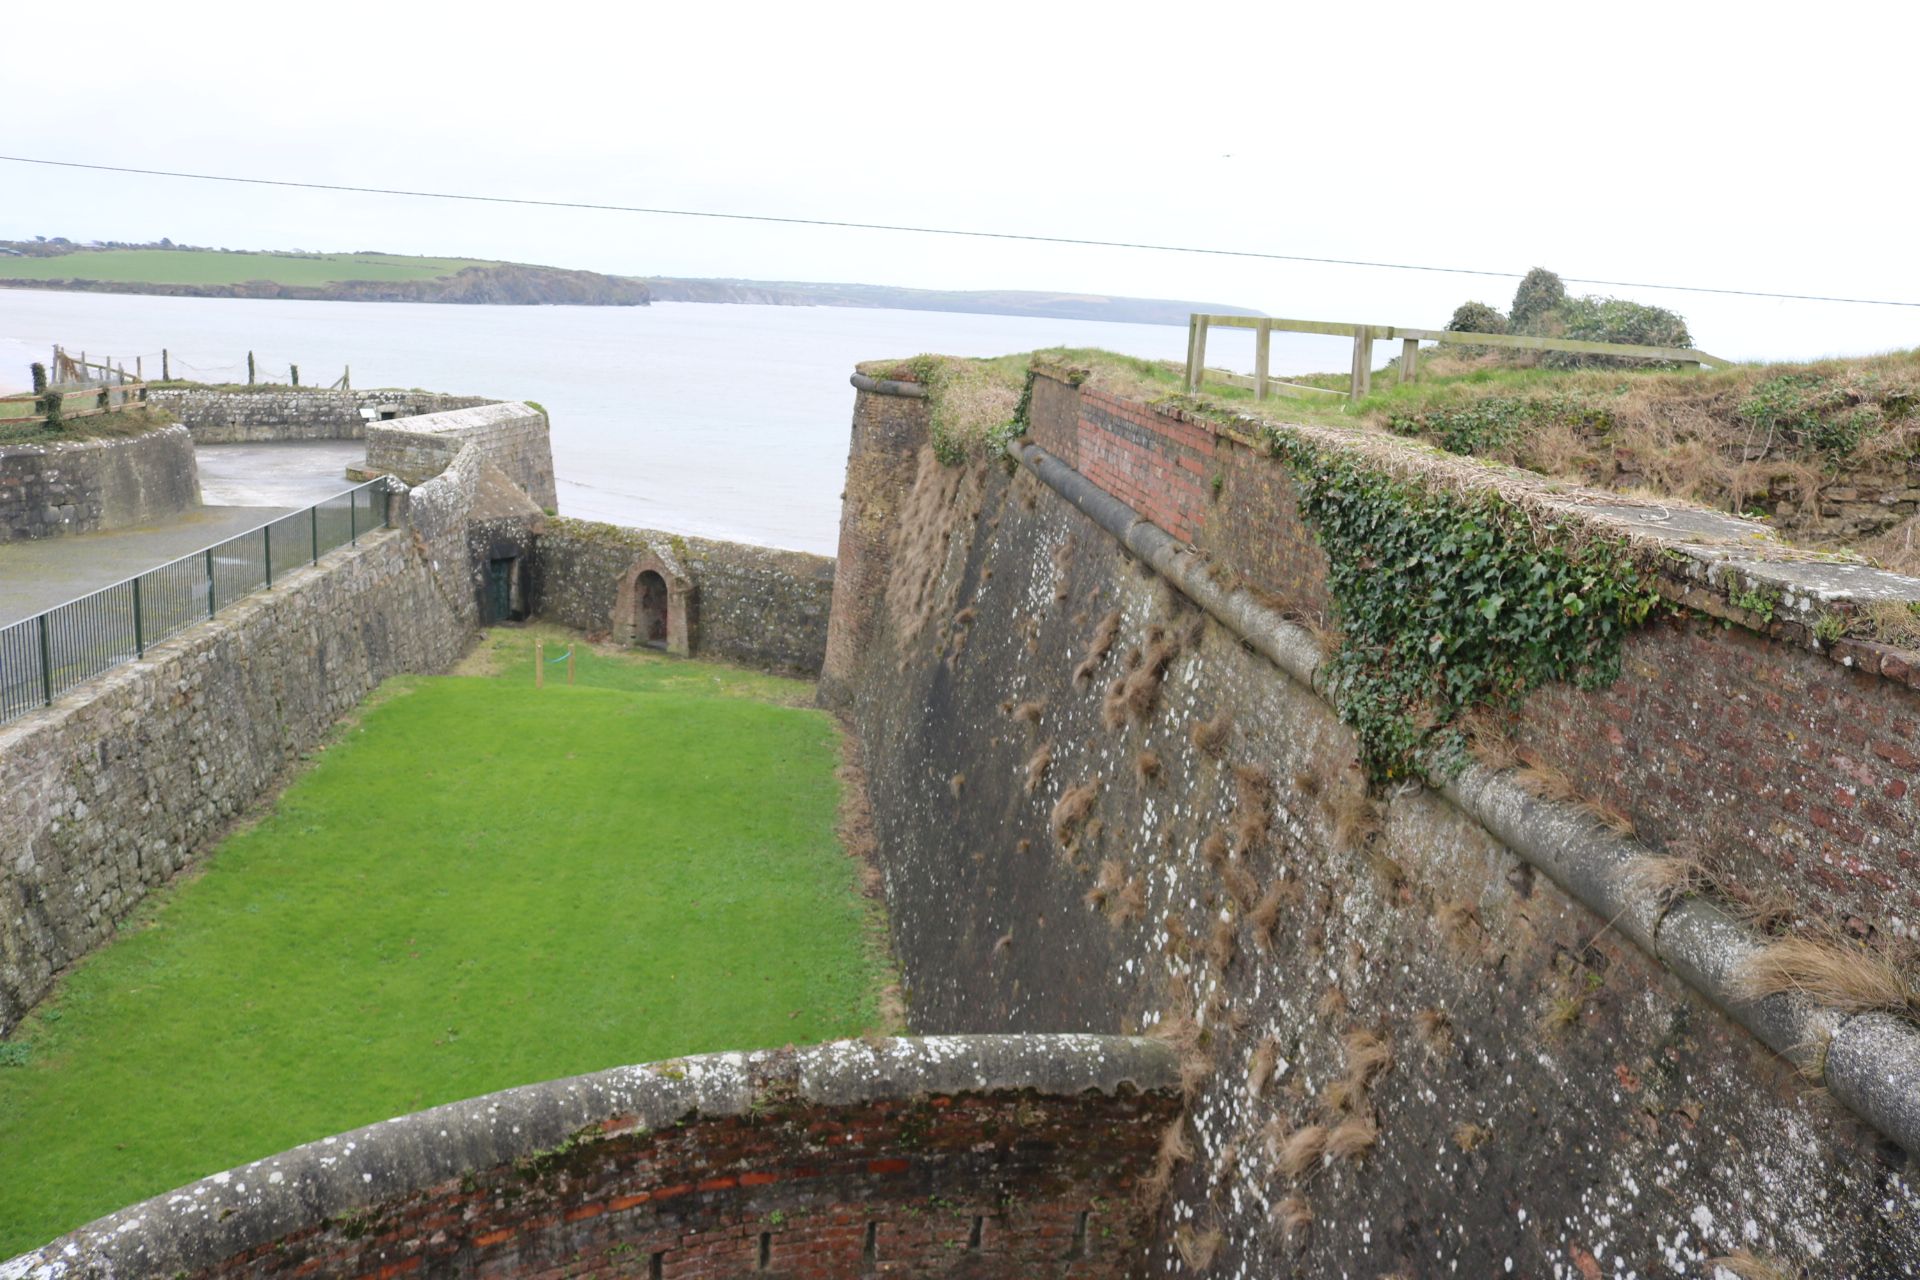 Duncannon Fort Wexford Film Locations